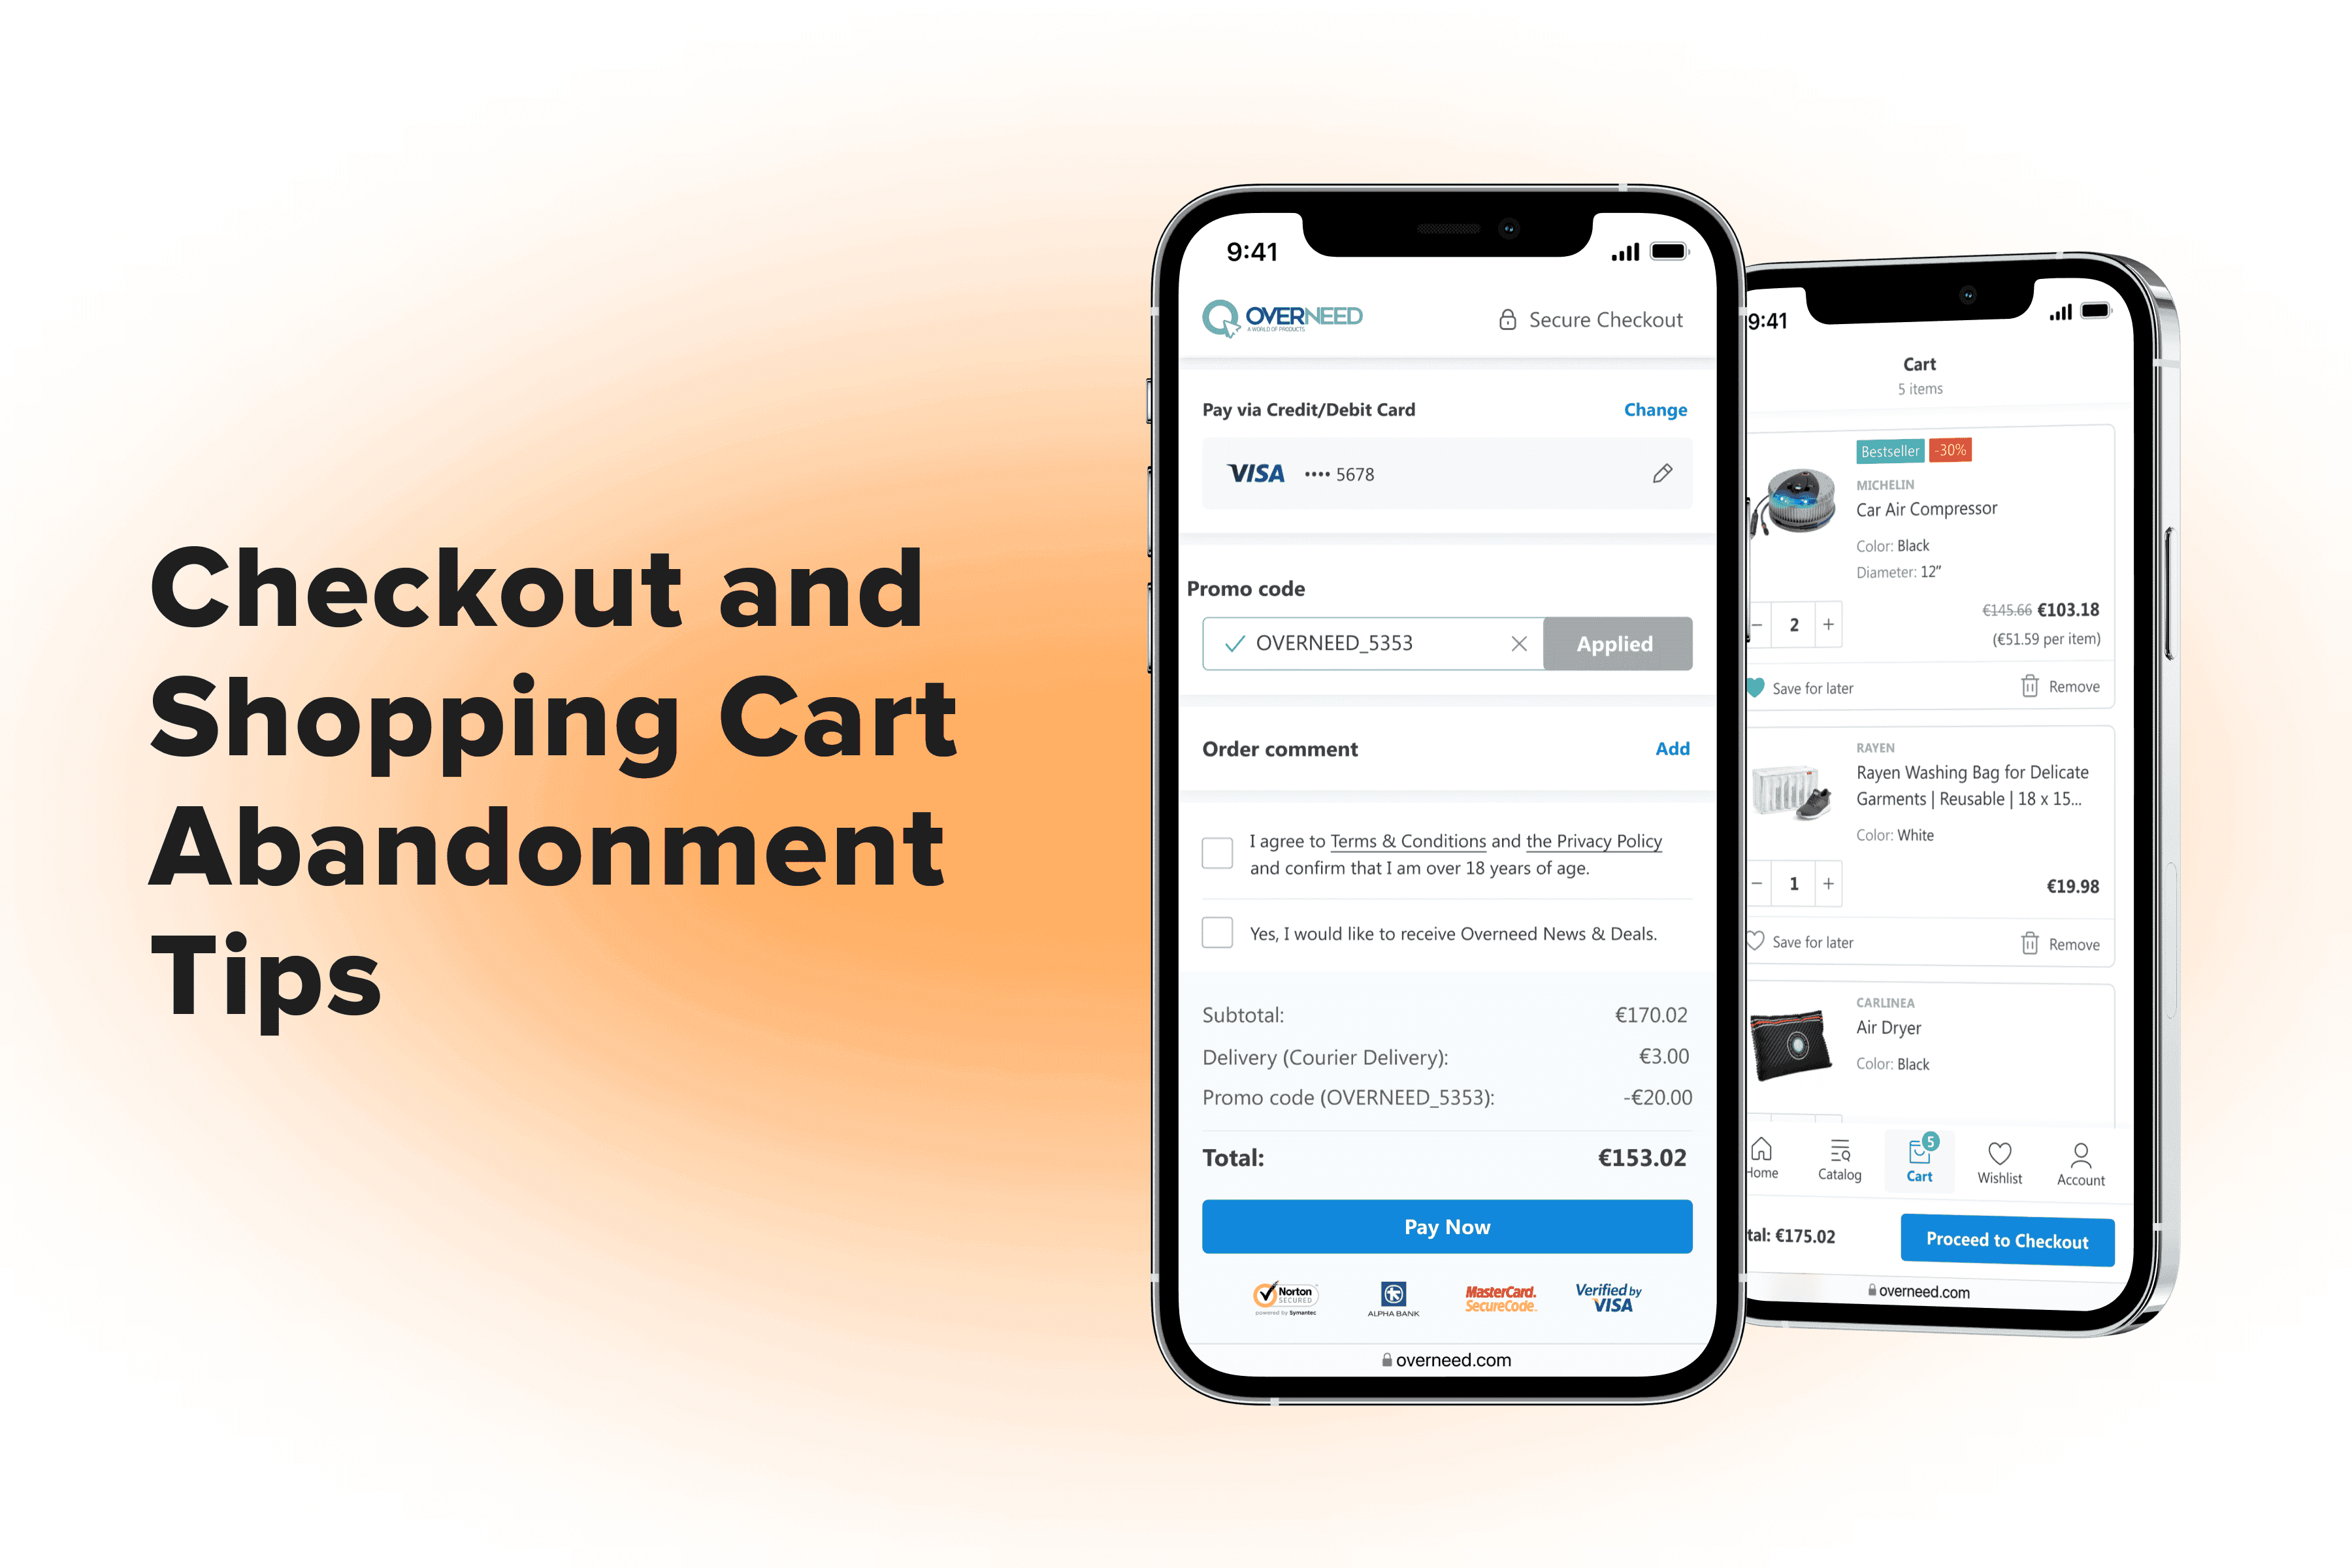 Checkout and Shopping Cart Abandonment